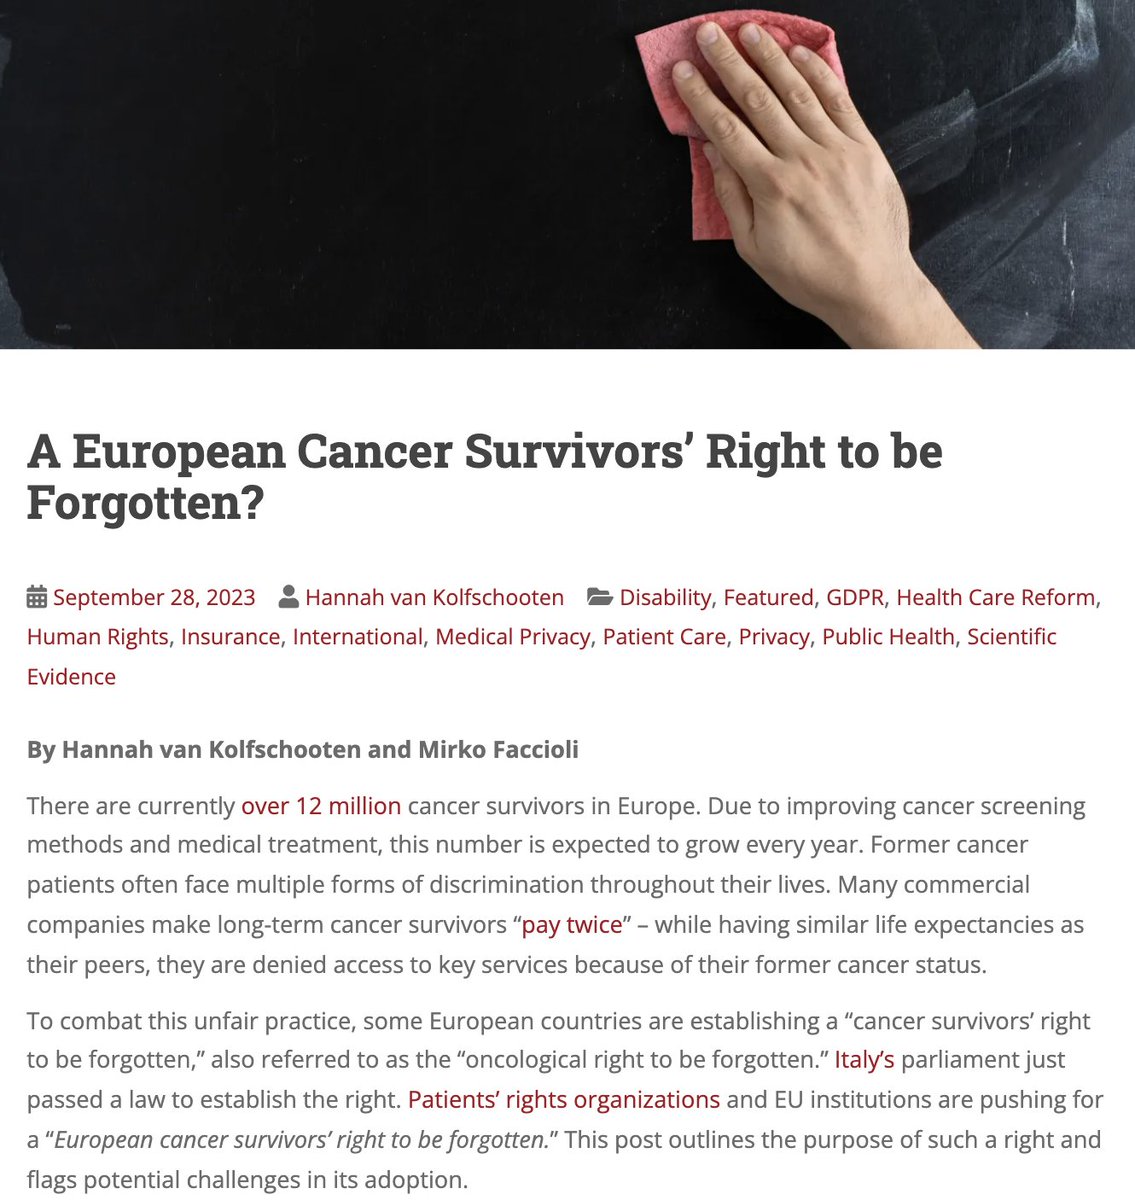 Cancer survivors face discrimination long after being cured. During my research stay @UniVerona, we wrote about the 'EU cancer survivors' right to be forgotten' or the 'oncological right to be forgotten'. See👉 Bill of Health @PetrieFlom: blog.petrieflom.law.harvard.edu/2023/09/28/a-e… @mirkofaccioli77